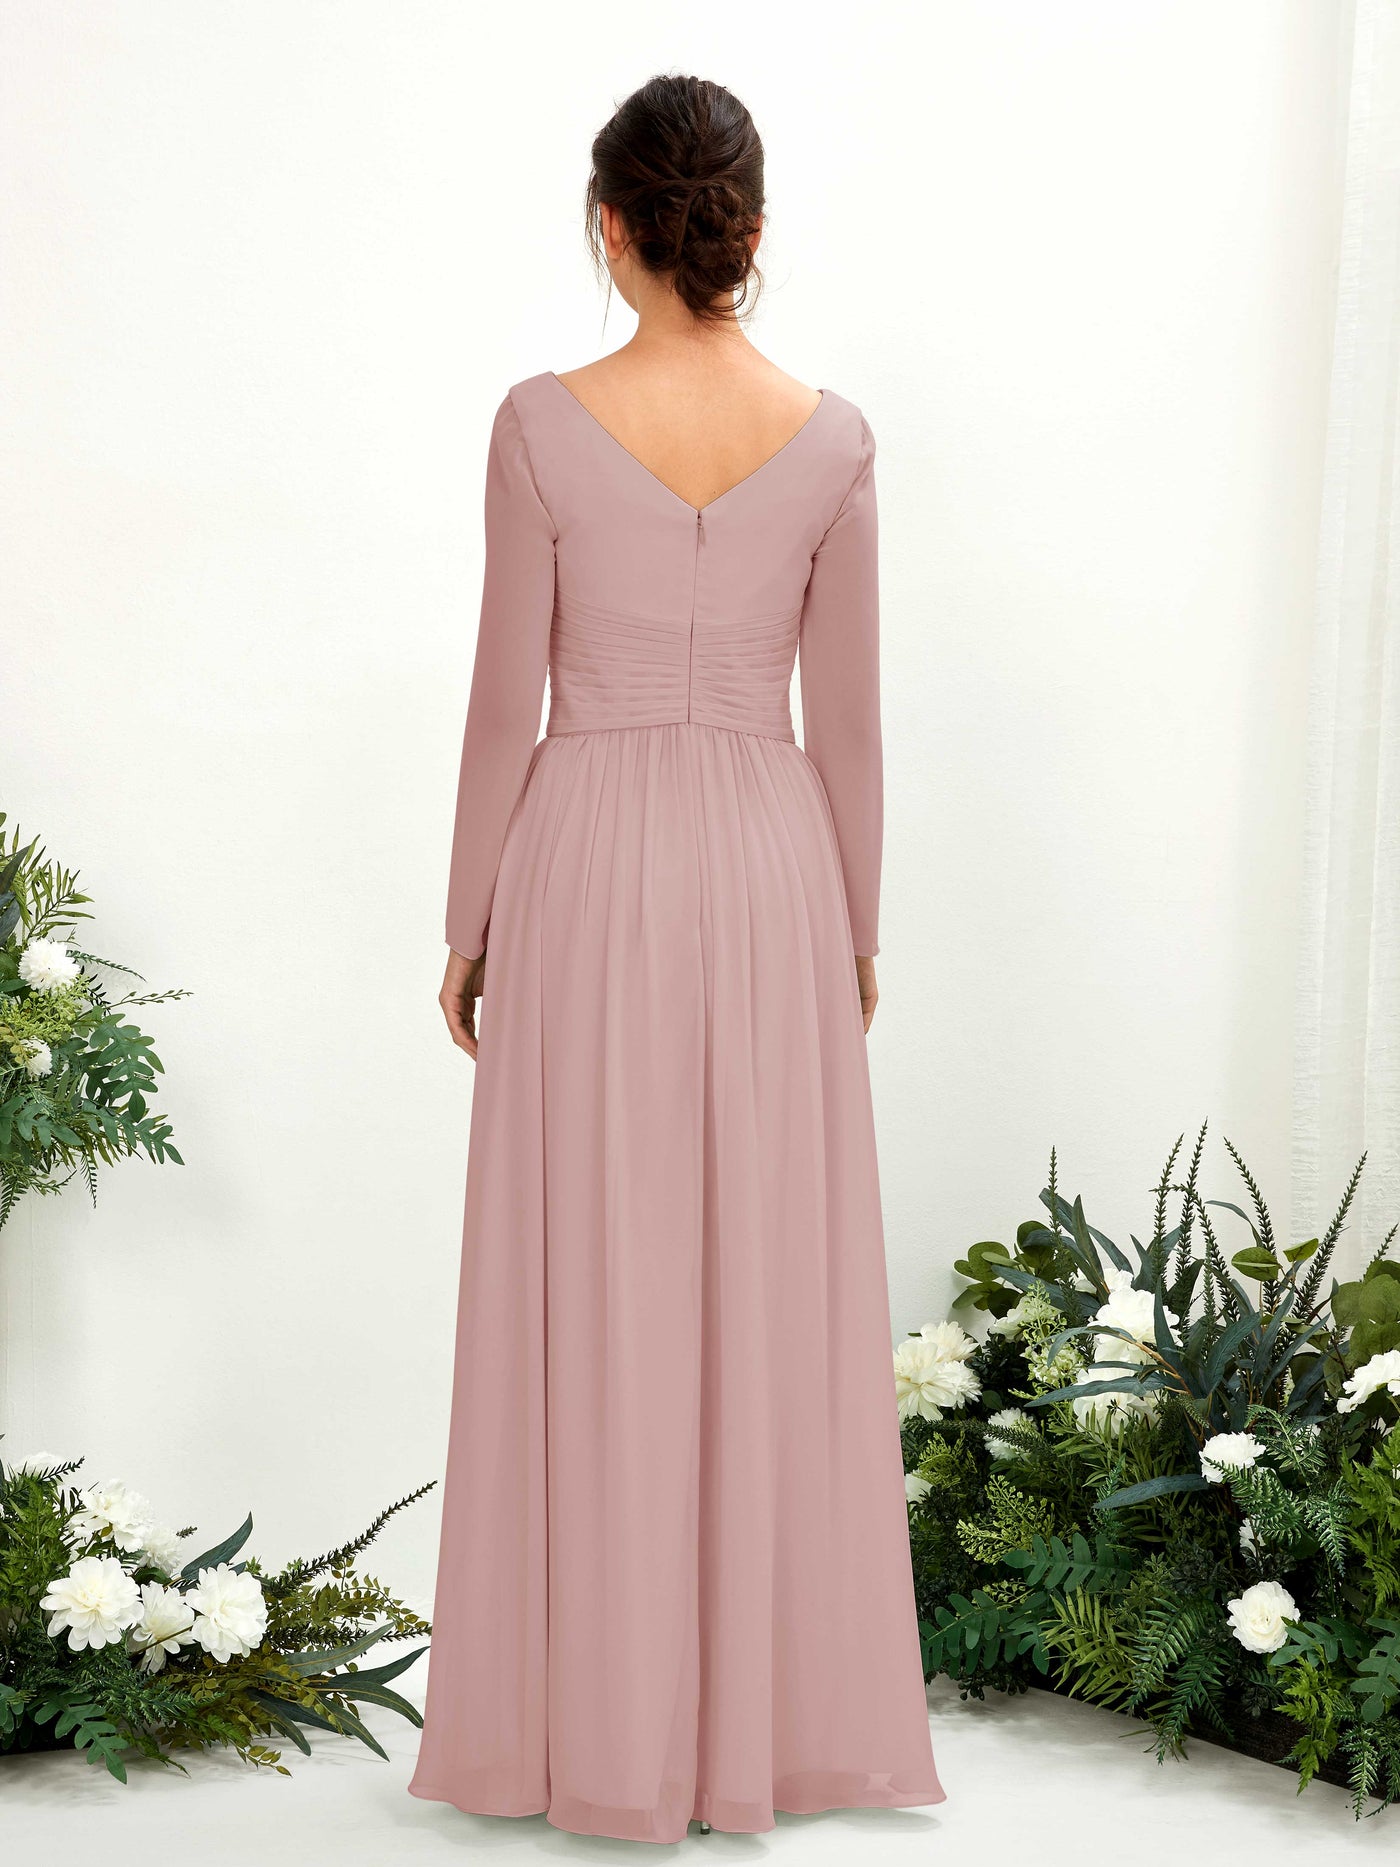 Dusty Rose Bridesmaid Dresses Bridesmaid Dress A-line Chiffon V-neck Full Length Long Sleeves Wedding Party Dress (81220309)#color_dusty-rose